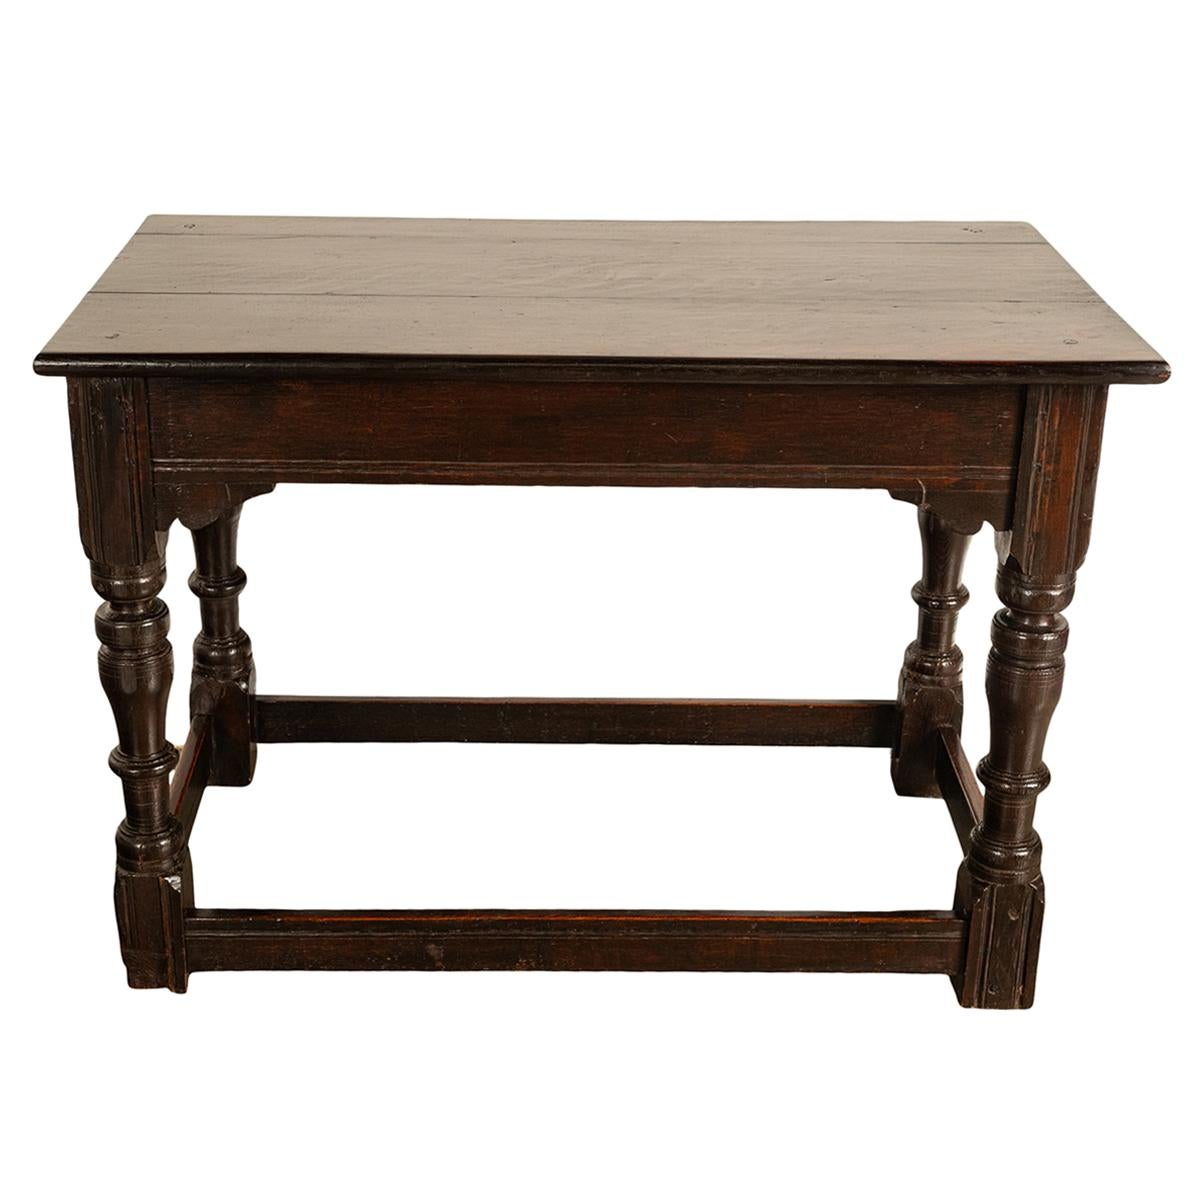 English Antique 17th Century Charles II Country Oak Refectory Side Serving Table 1680 For Sale